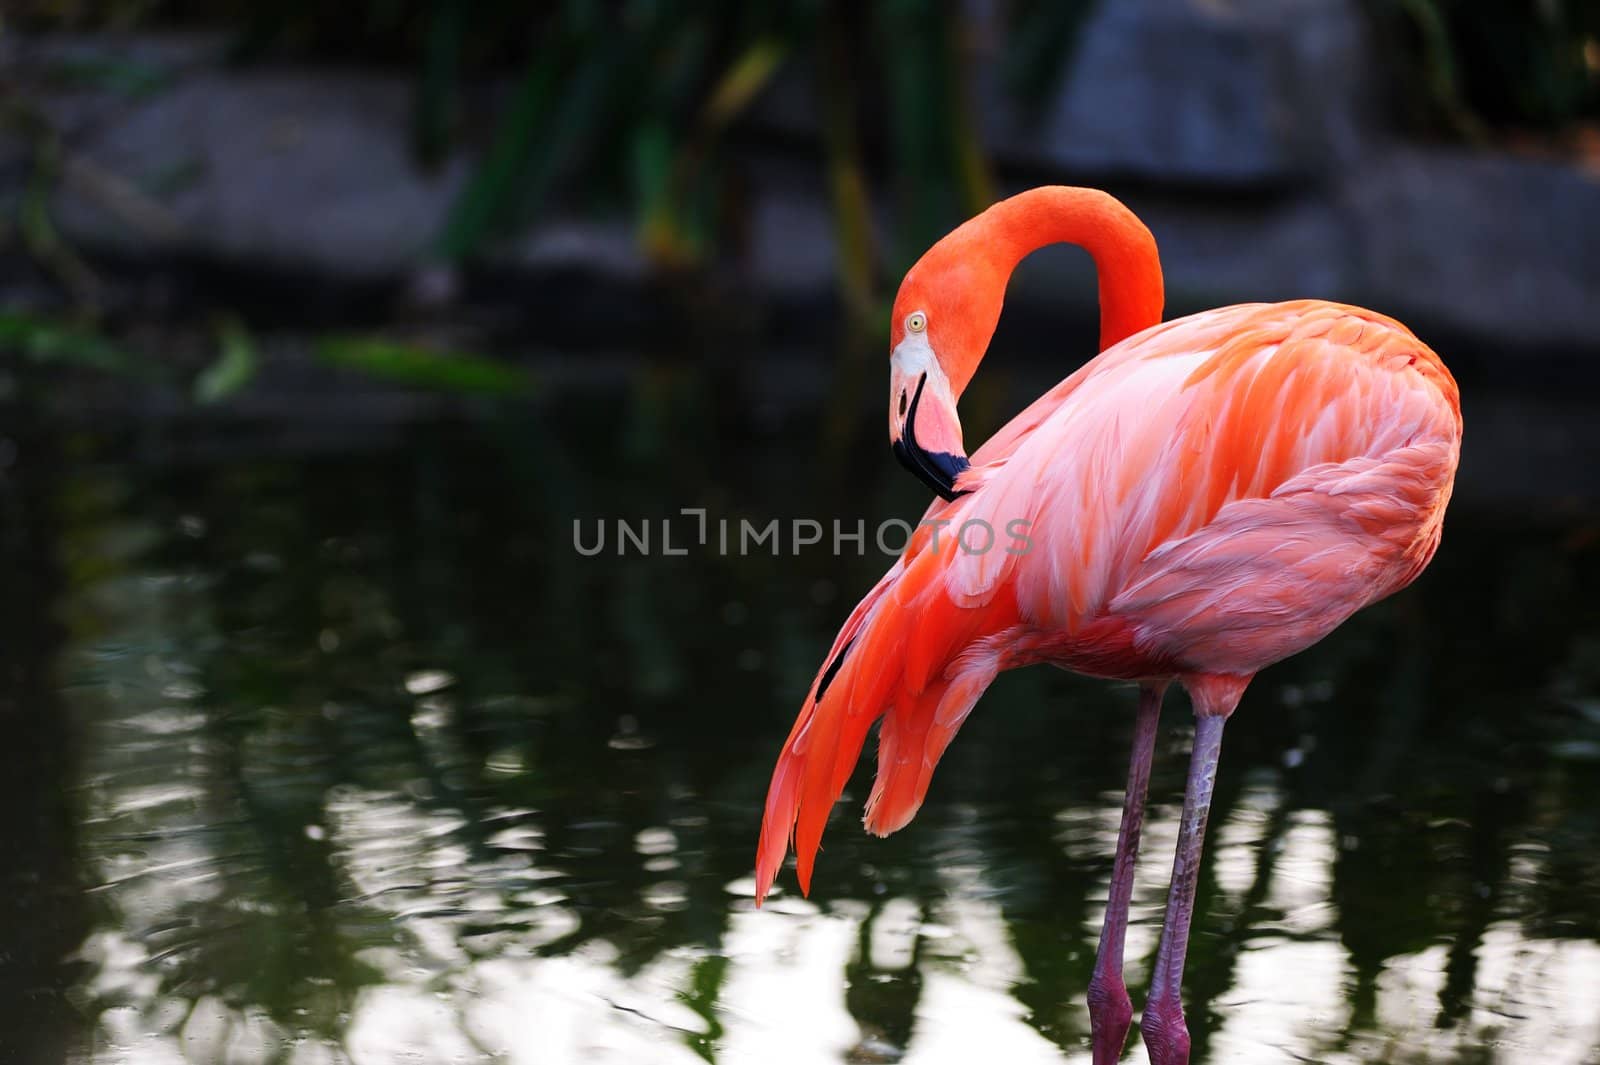 A flamingo bird standing in the pond